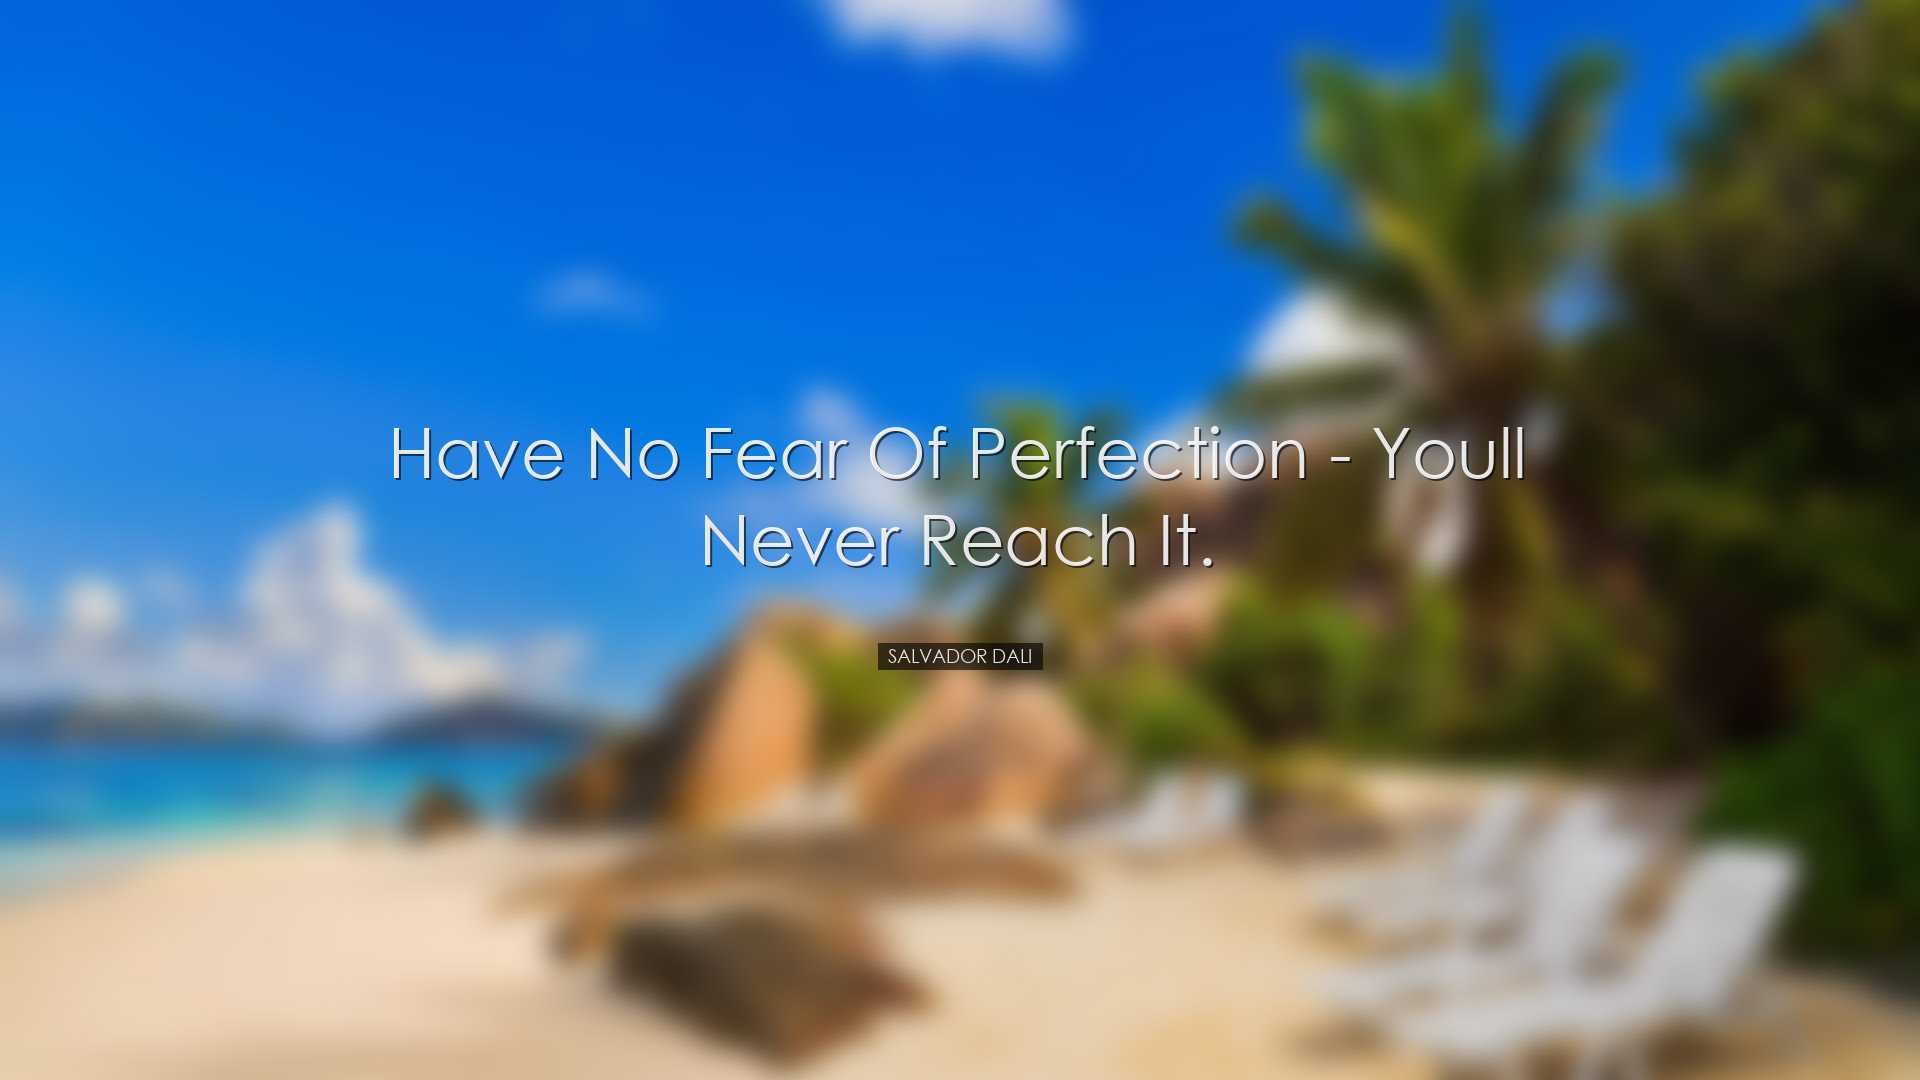 Have no fear of perfection - youll never reach it. - Salvador Dali